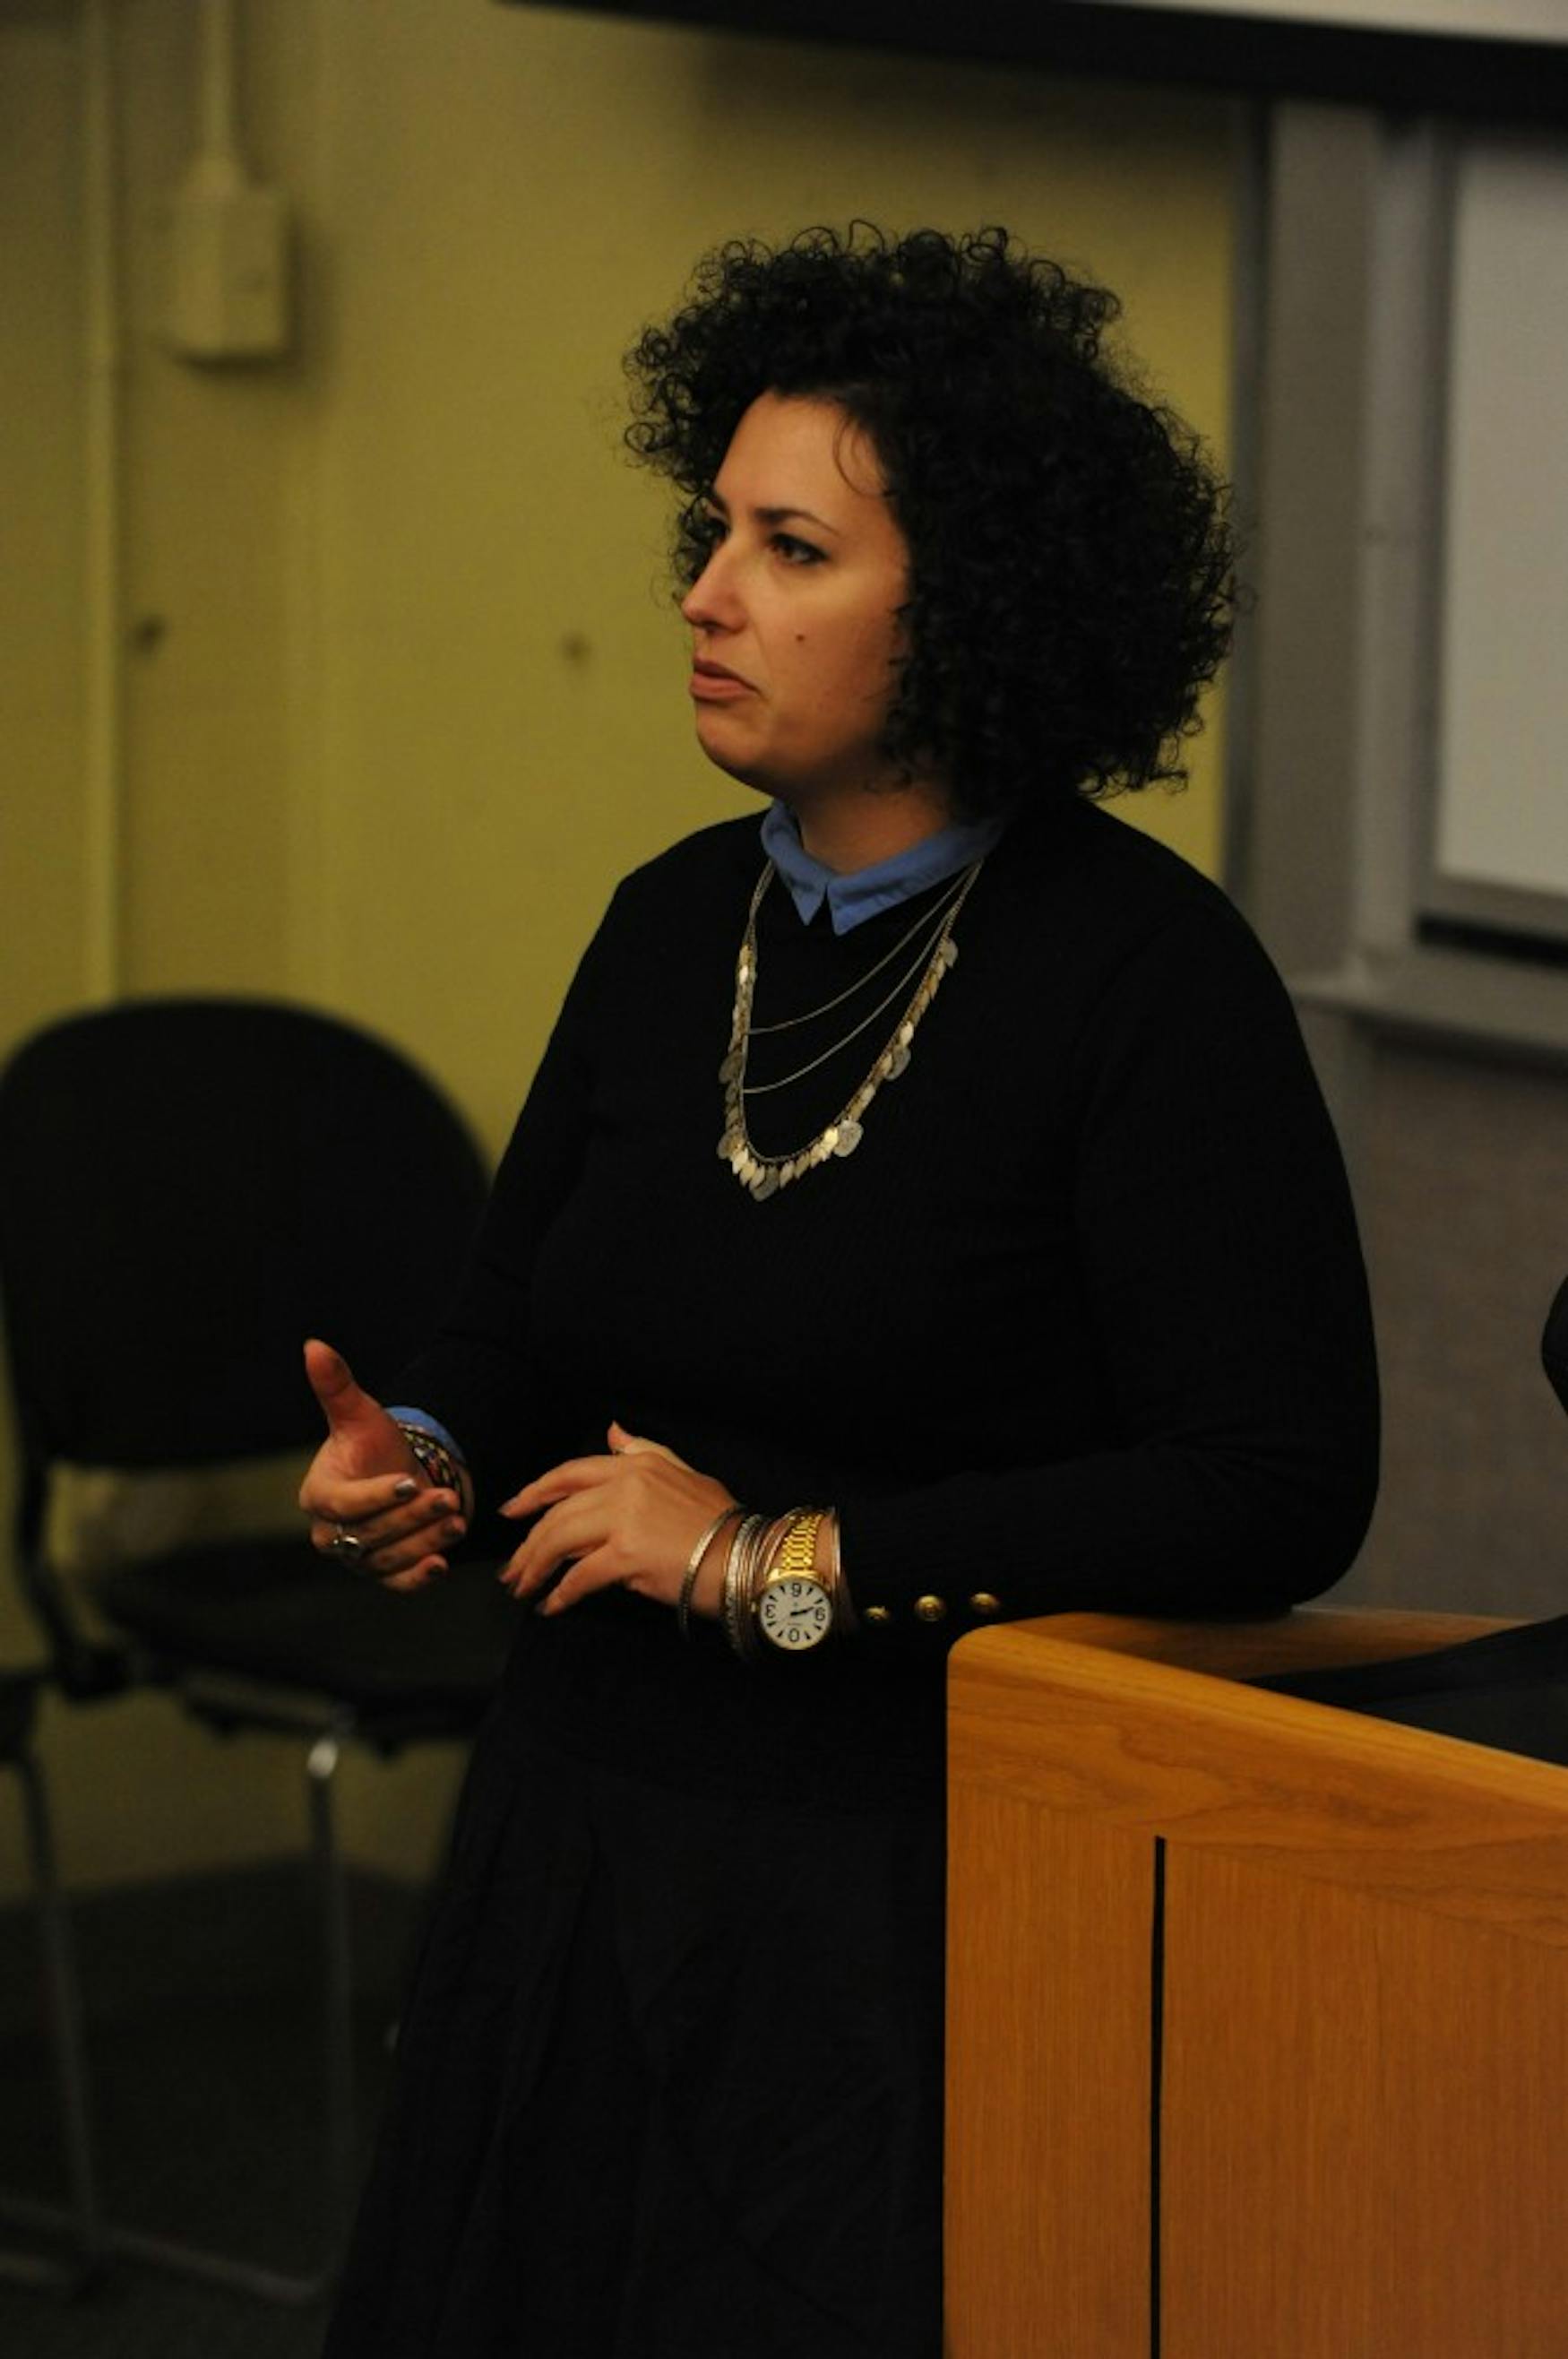 Lia Tarachansky spoke about the Nakba in addressing her 2013 documentary on the Israeli-Palestinian conflict titled ‘On the Side of the Road.’